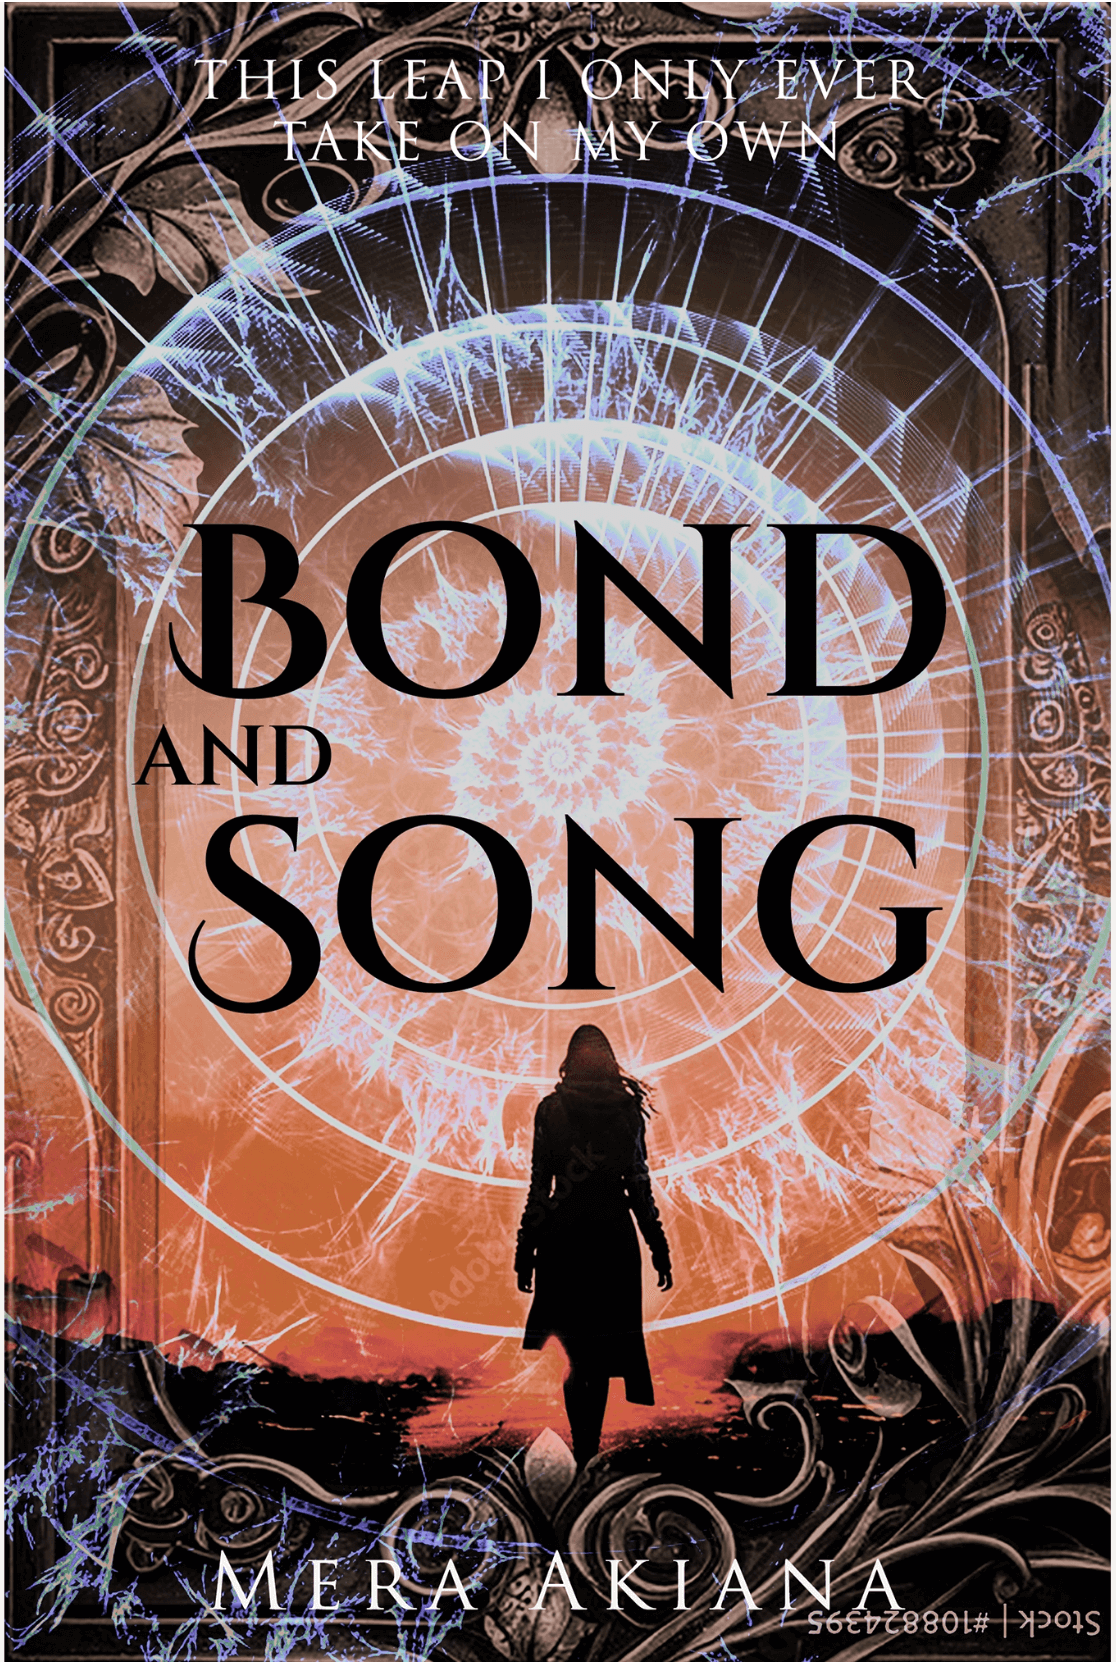 Early draft of cover design concept for Bond and Song